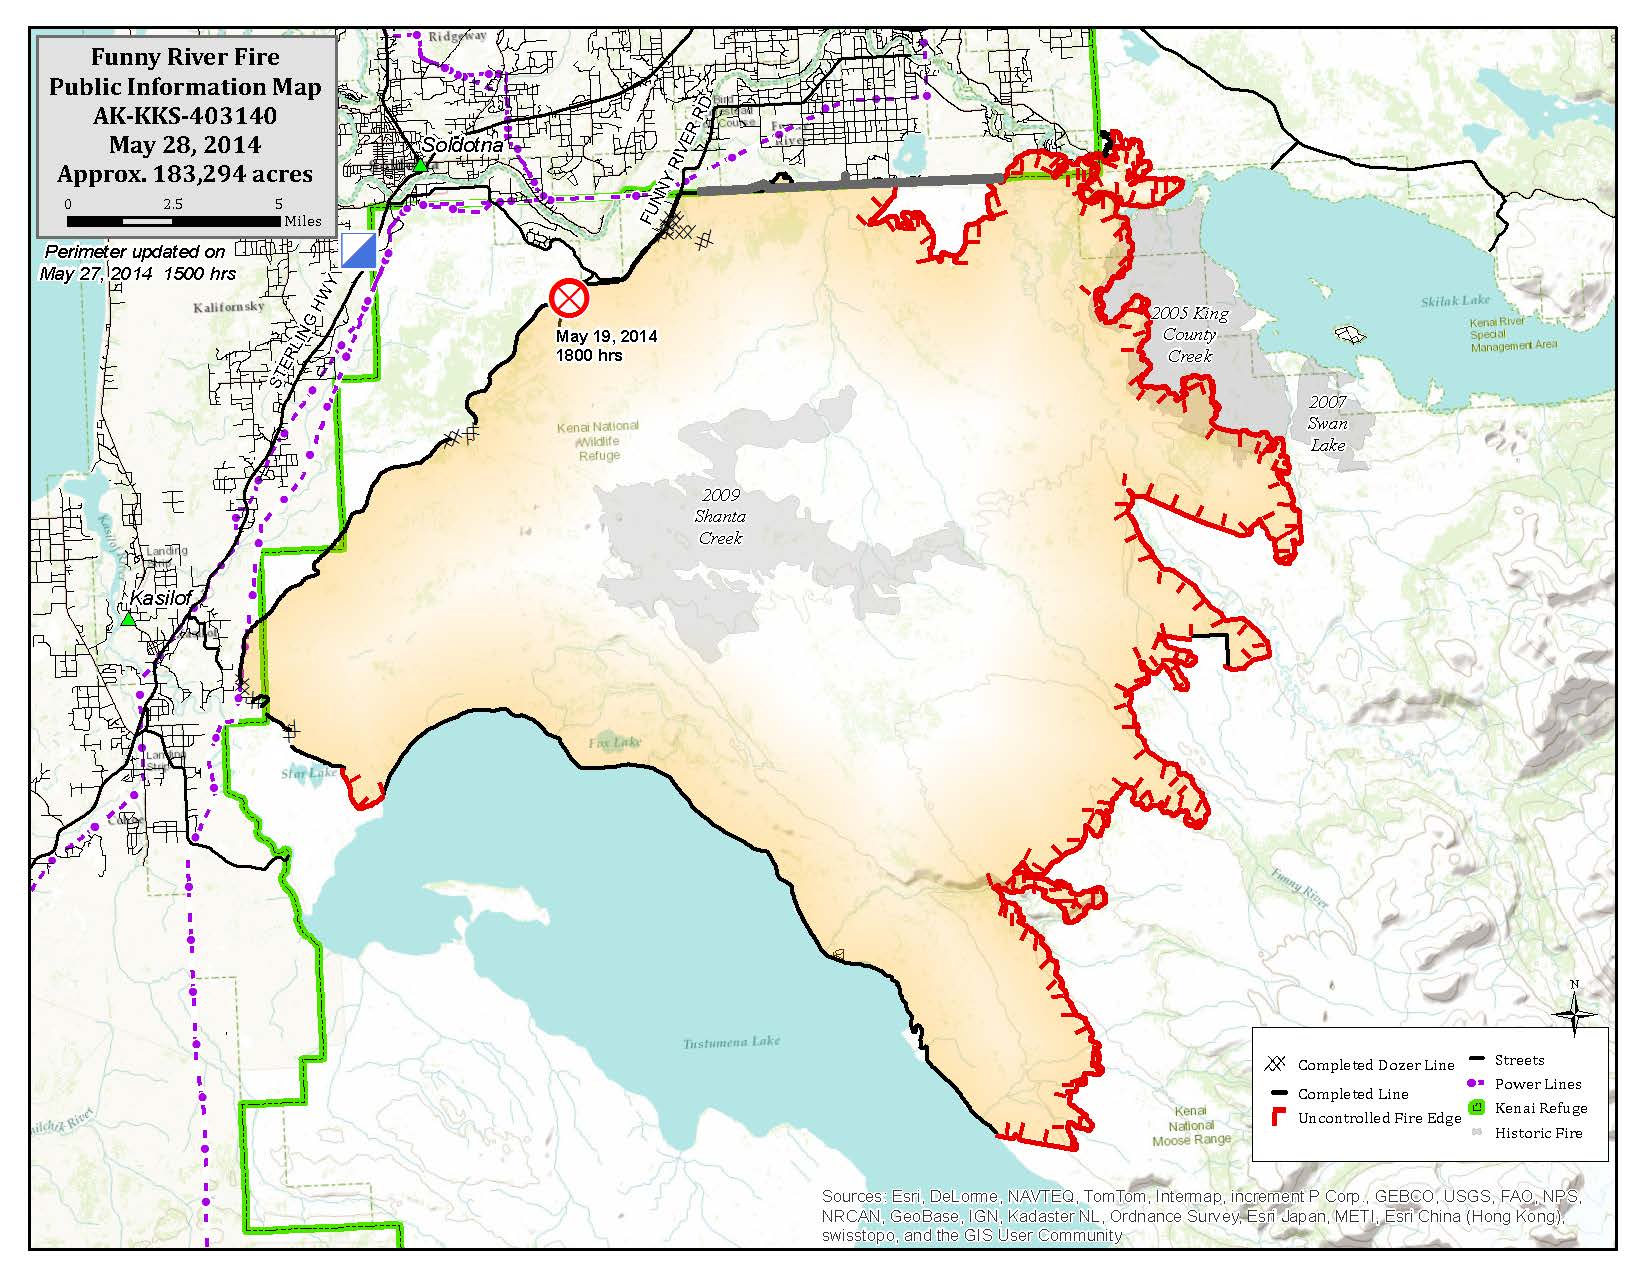 May 28 Funny River Fire Update, 183,294 acres with 30 percent containment -  KPBSD Communications Field NotesKenai Peninsula Borough School District |  Sharing Stories ~ Learn, Connect, Engage